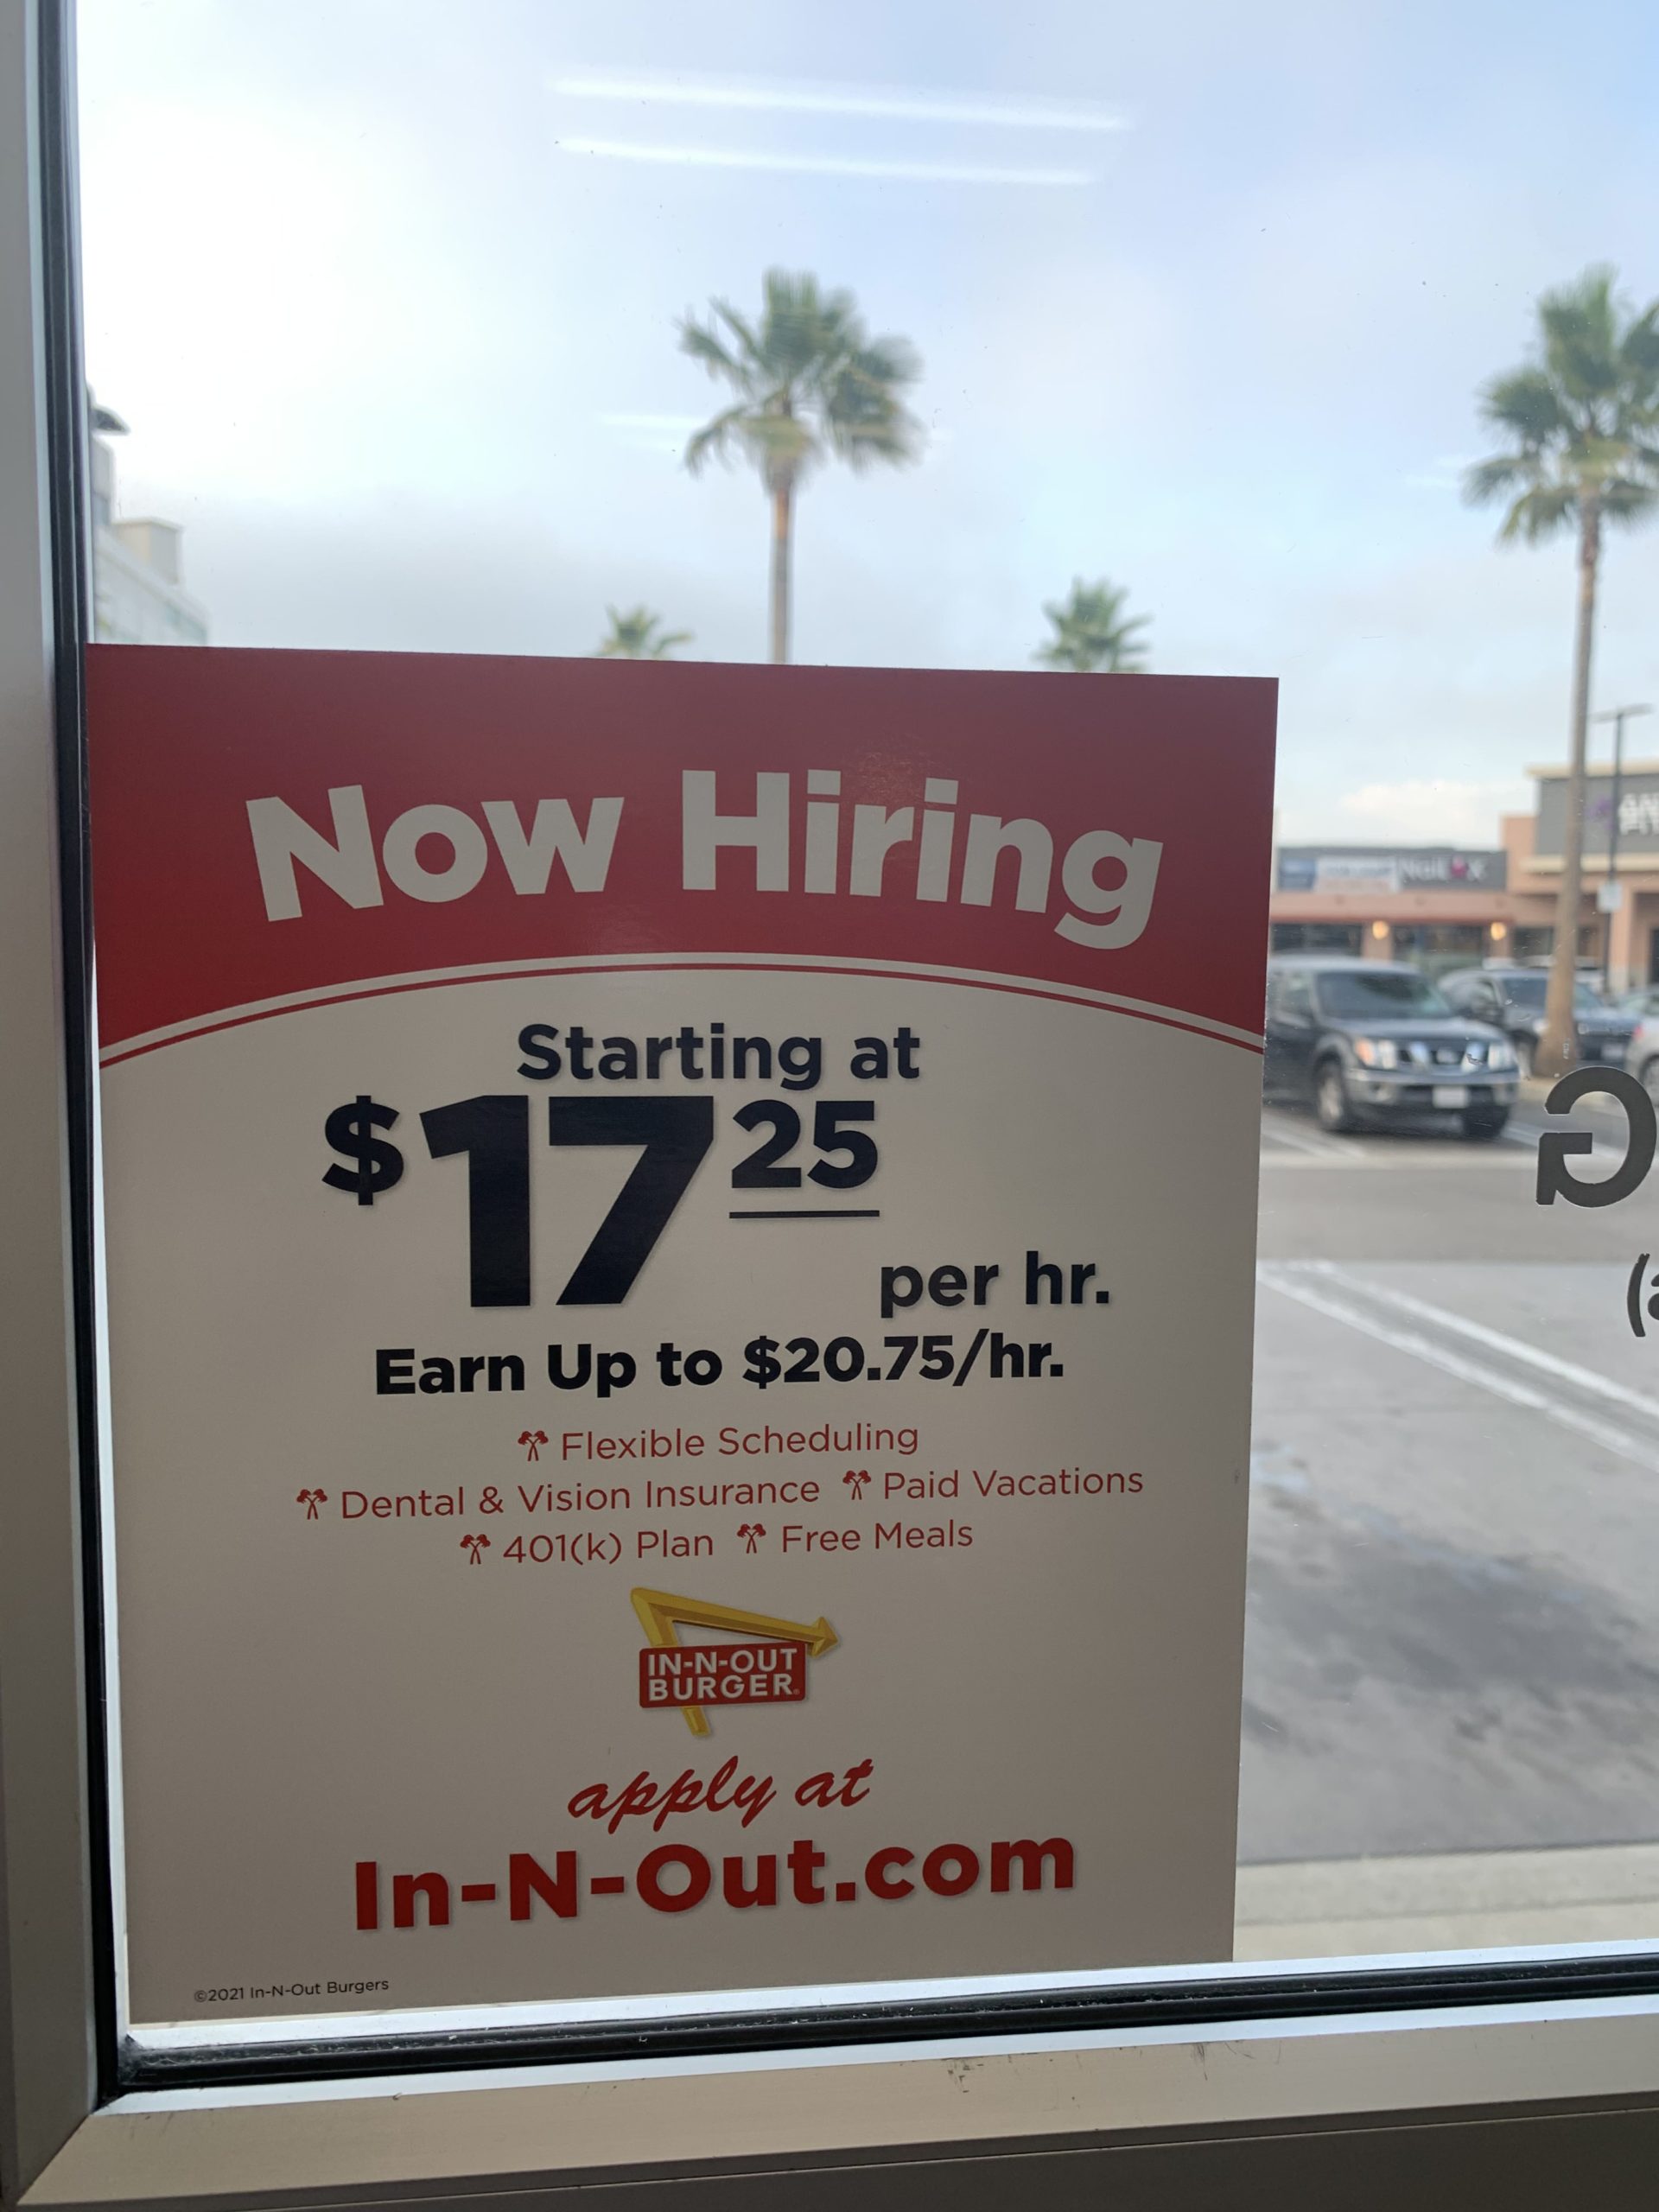 In-N-Out in Los Angeles is offering new hires a starting wage of $17.25 an hour